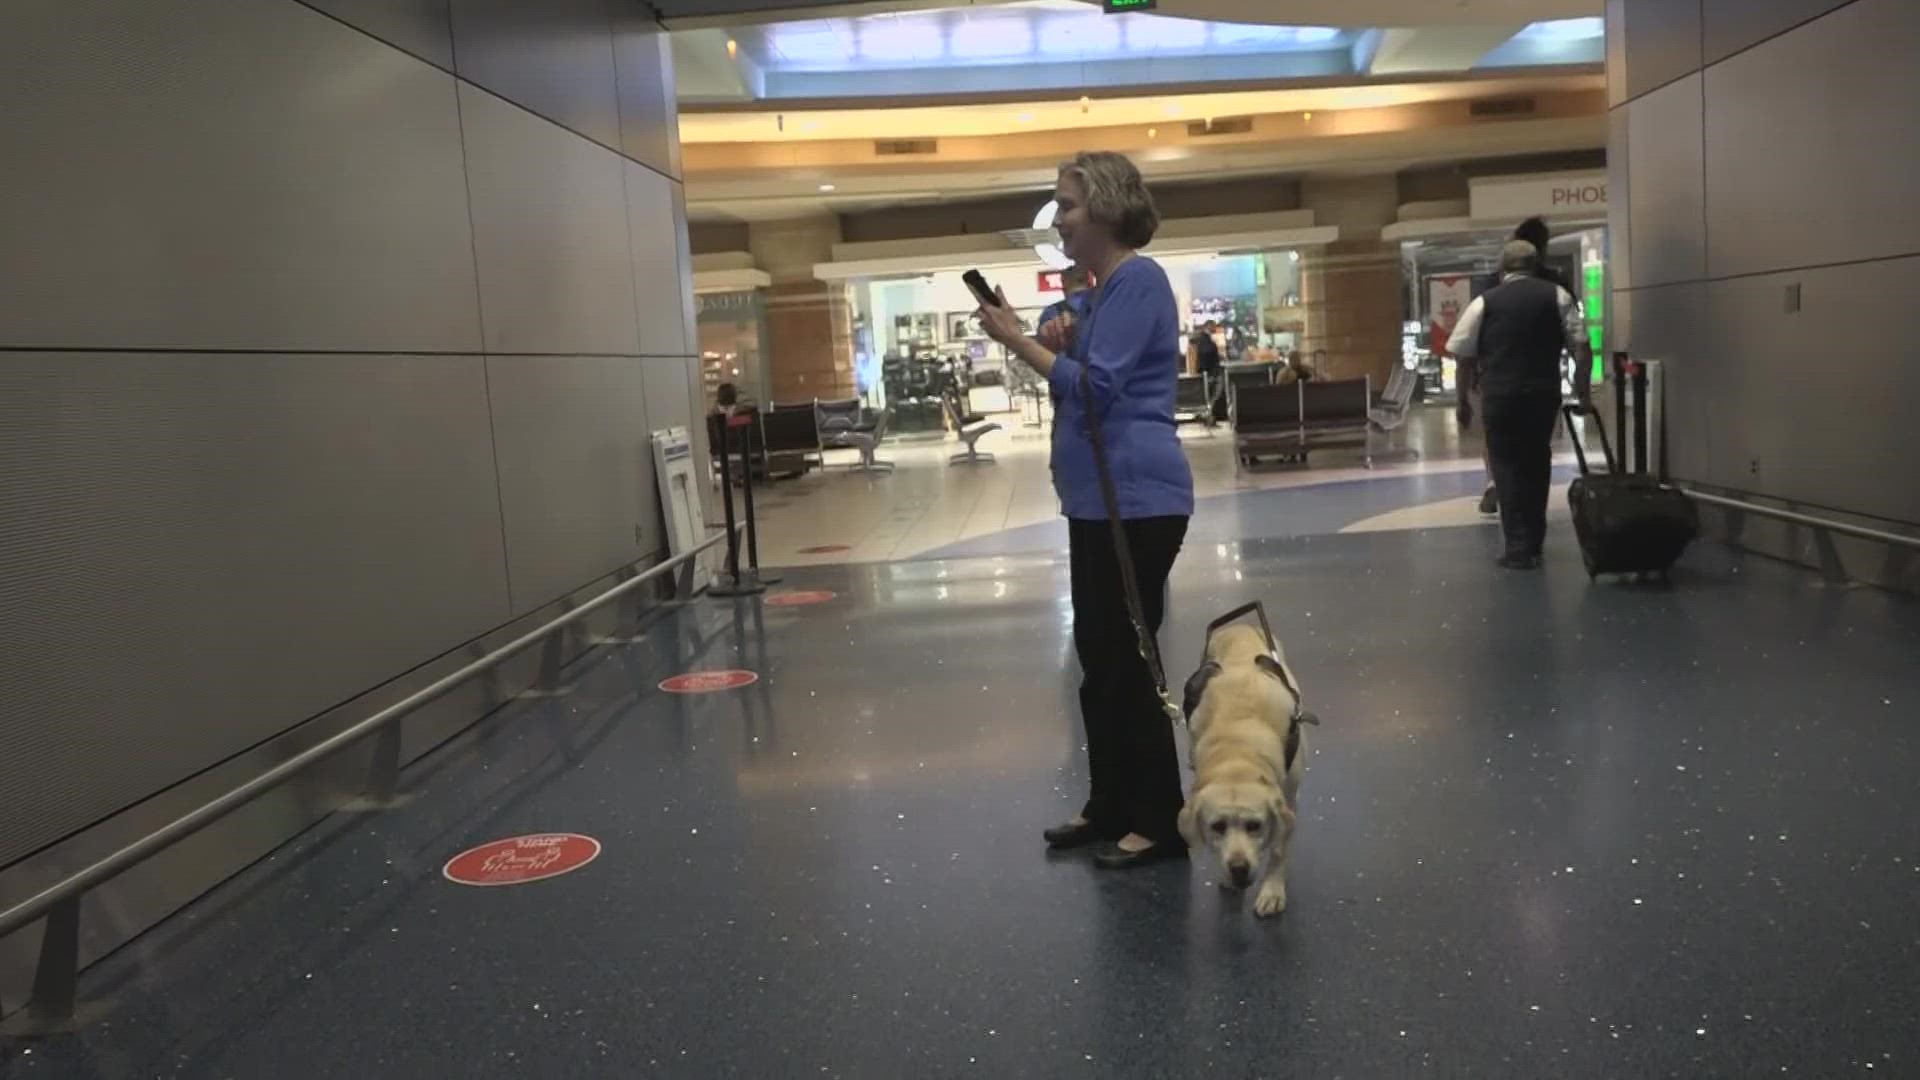 A new service at Phoenix Sky Harbor Airport is designed to assist travelers with vision loss. Jen Wahl has the details.